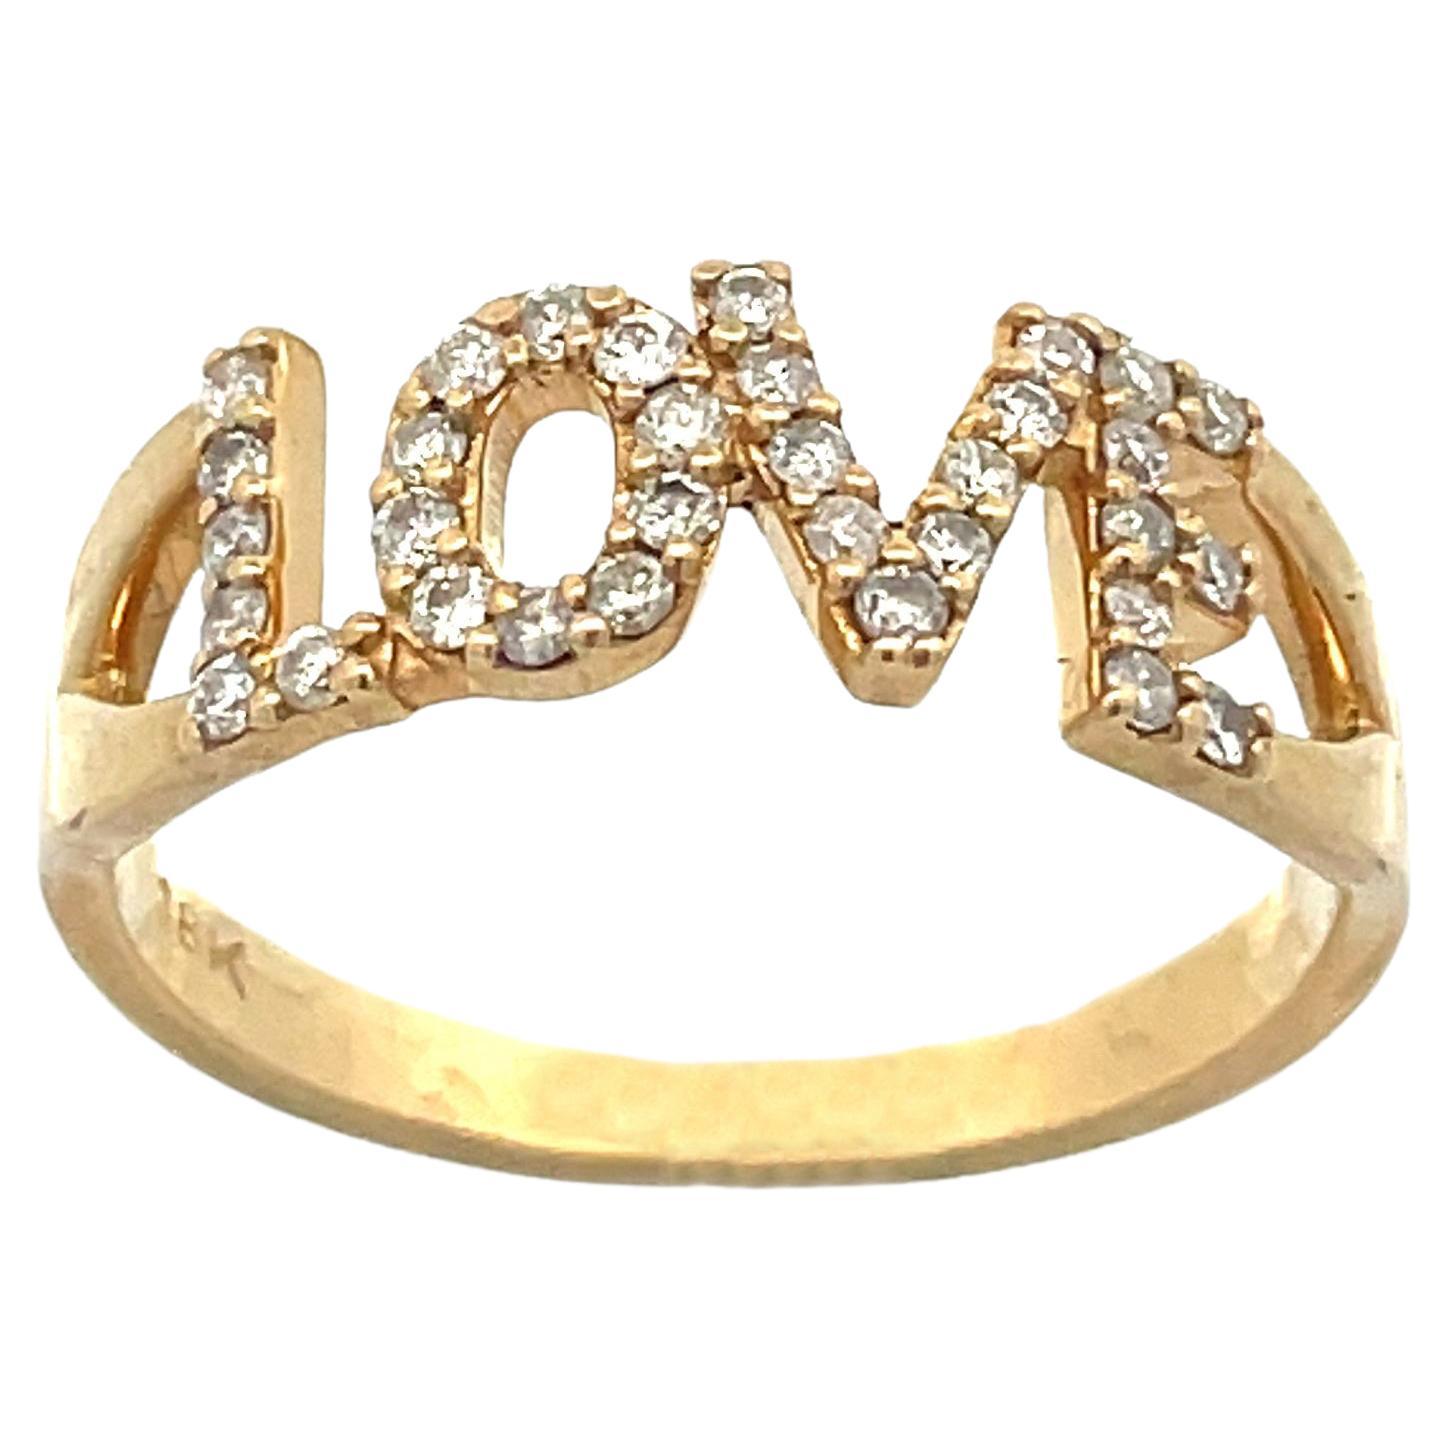 Vintage Cartier Love Ring in Yellow Gold Size 49 at Susannah Lovis Jewellers